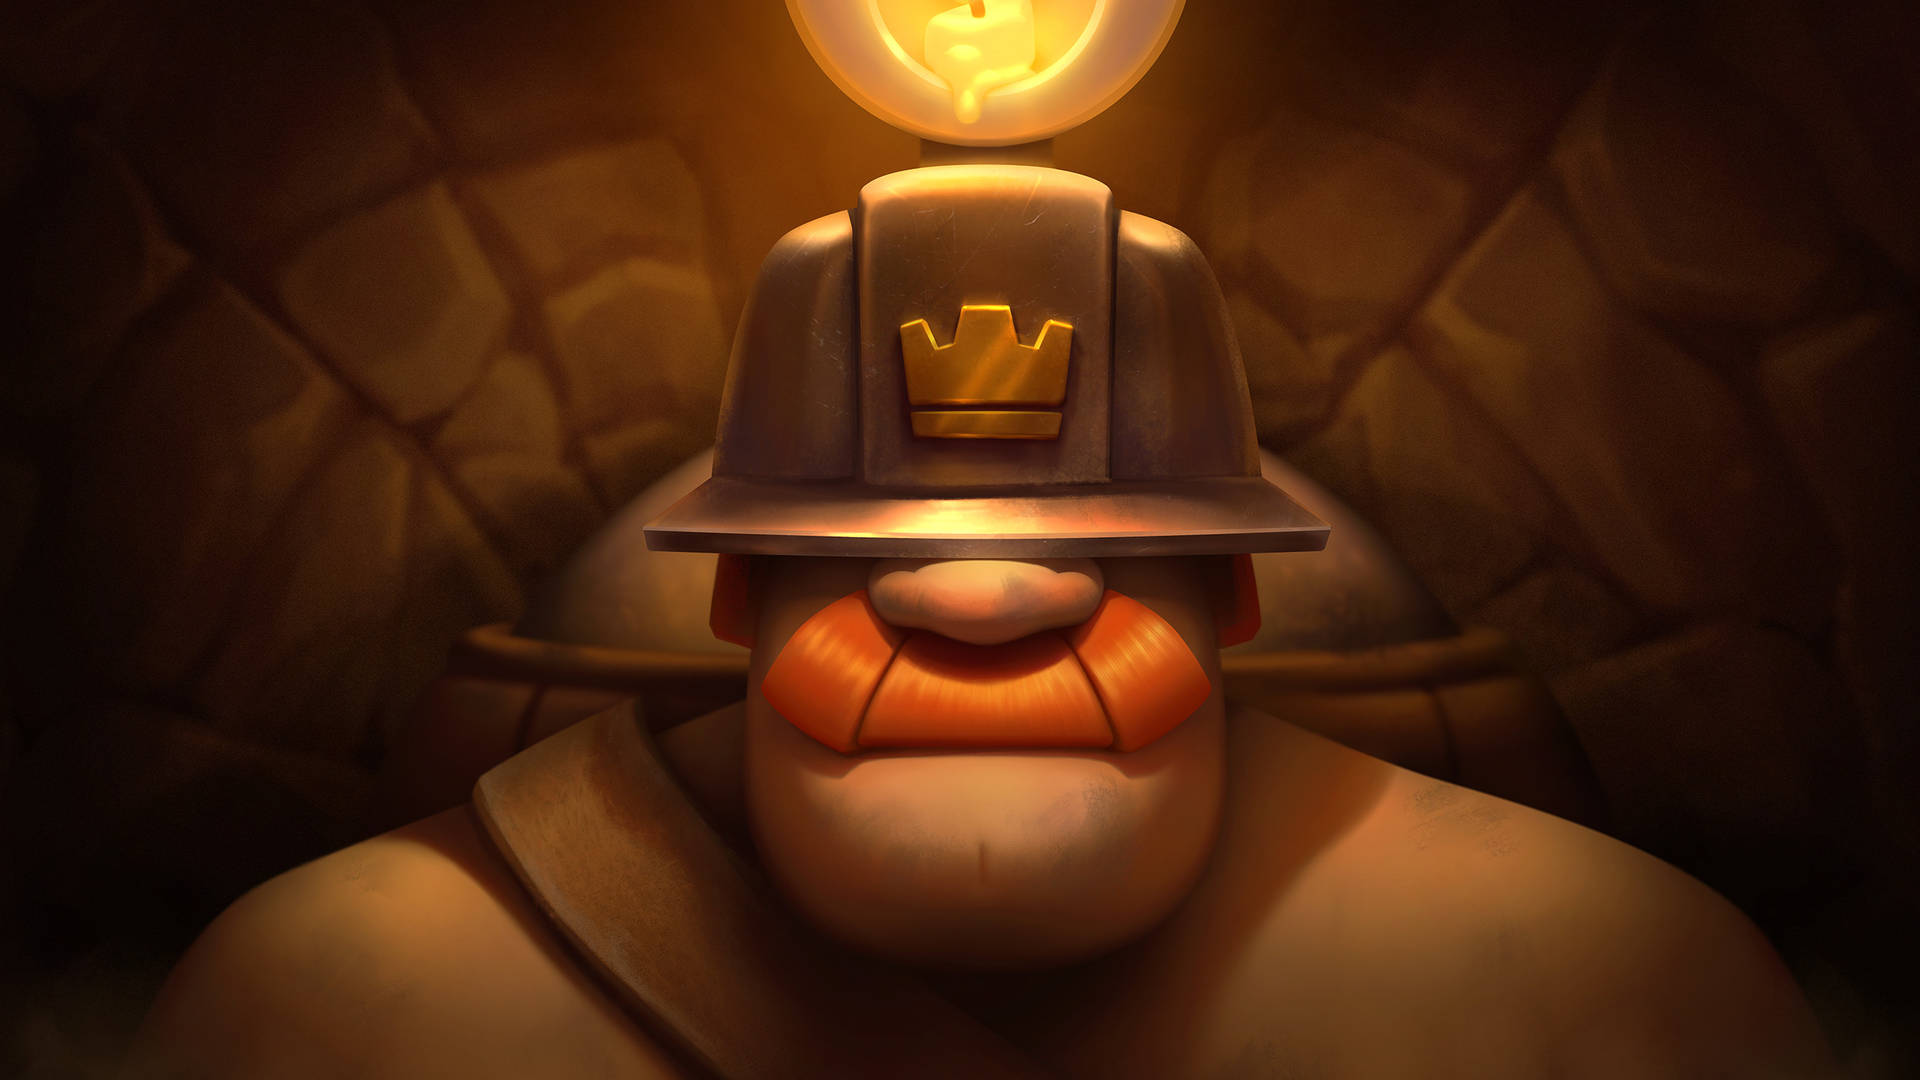 The Mighty Miner From The Clash Royale Phone Game Wallpaper